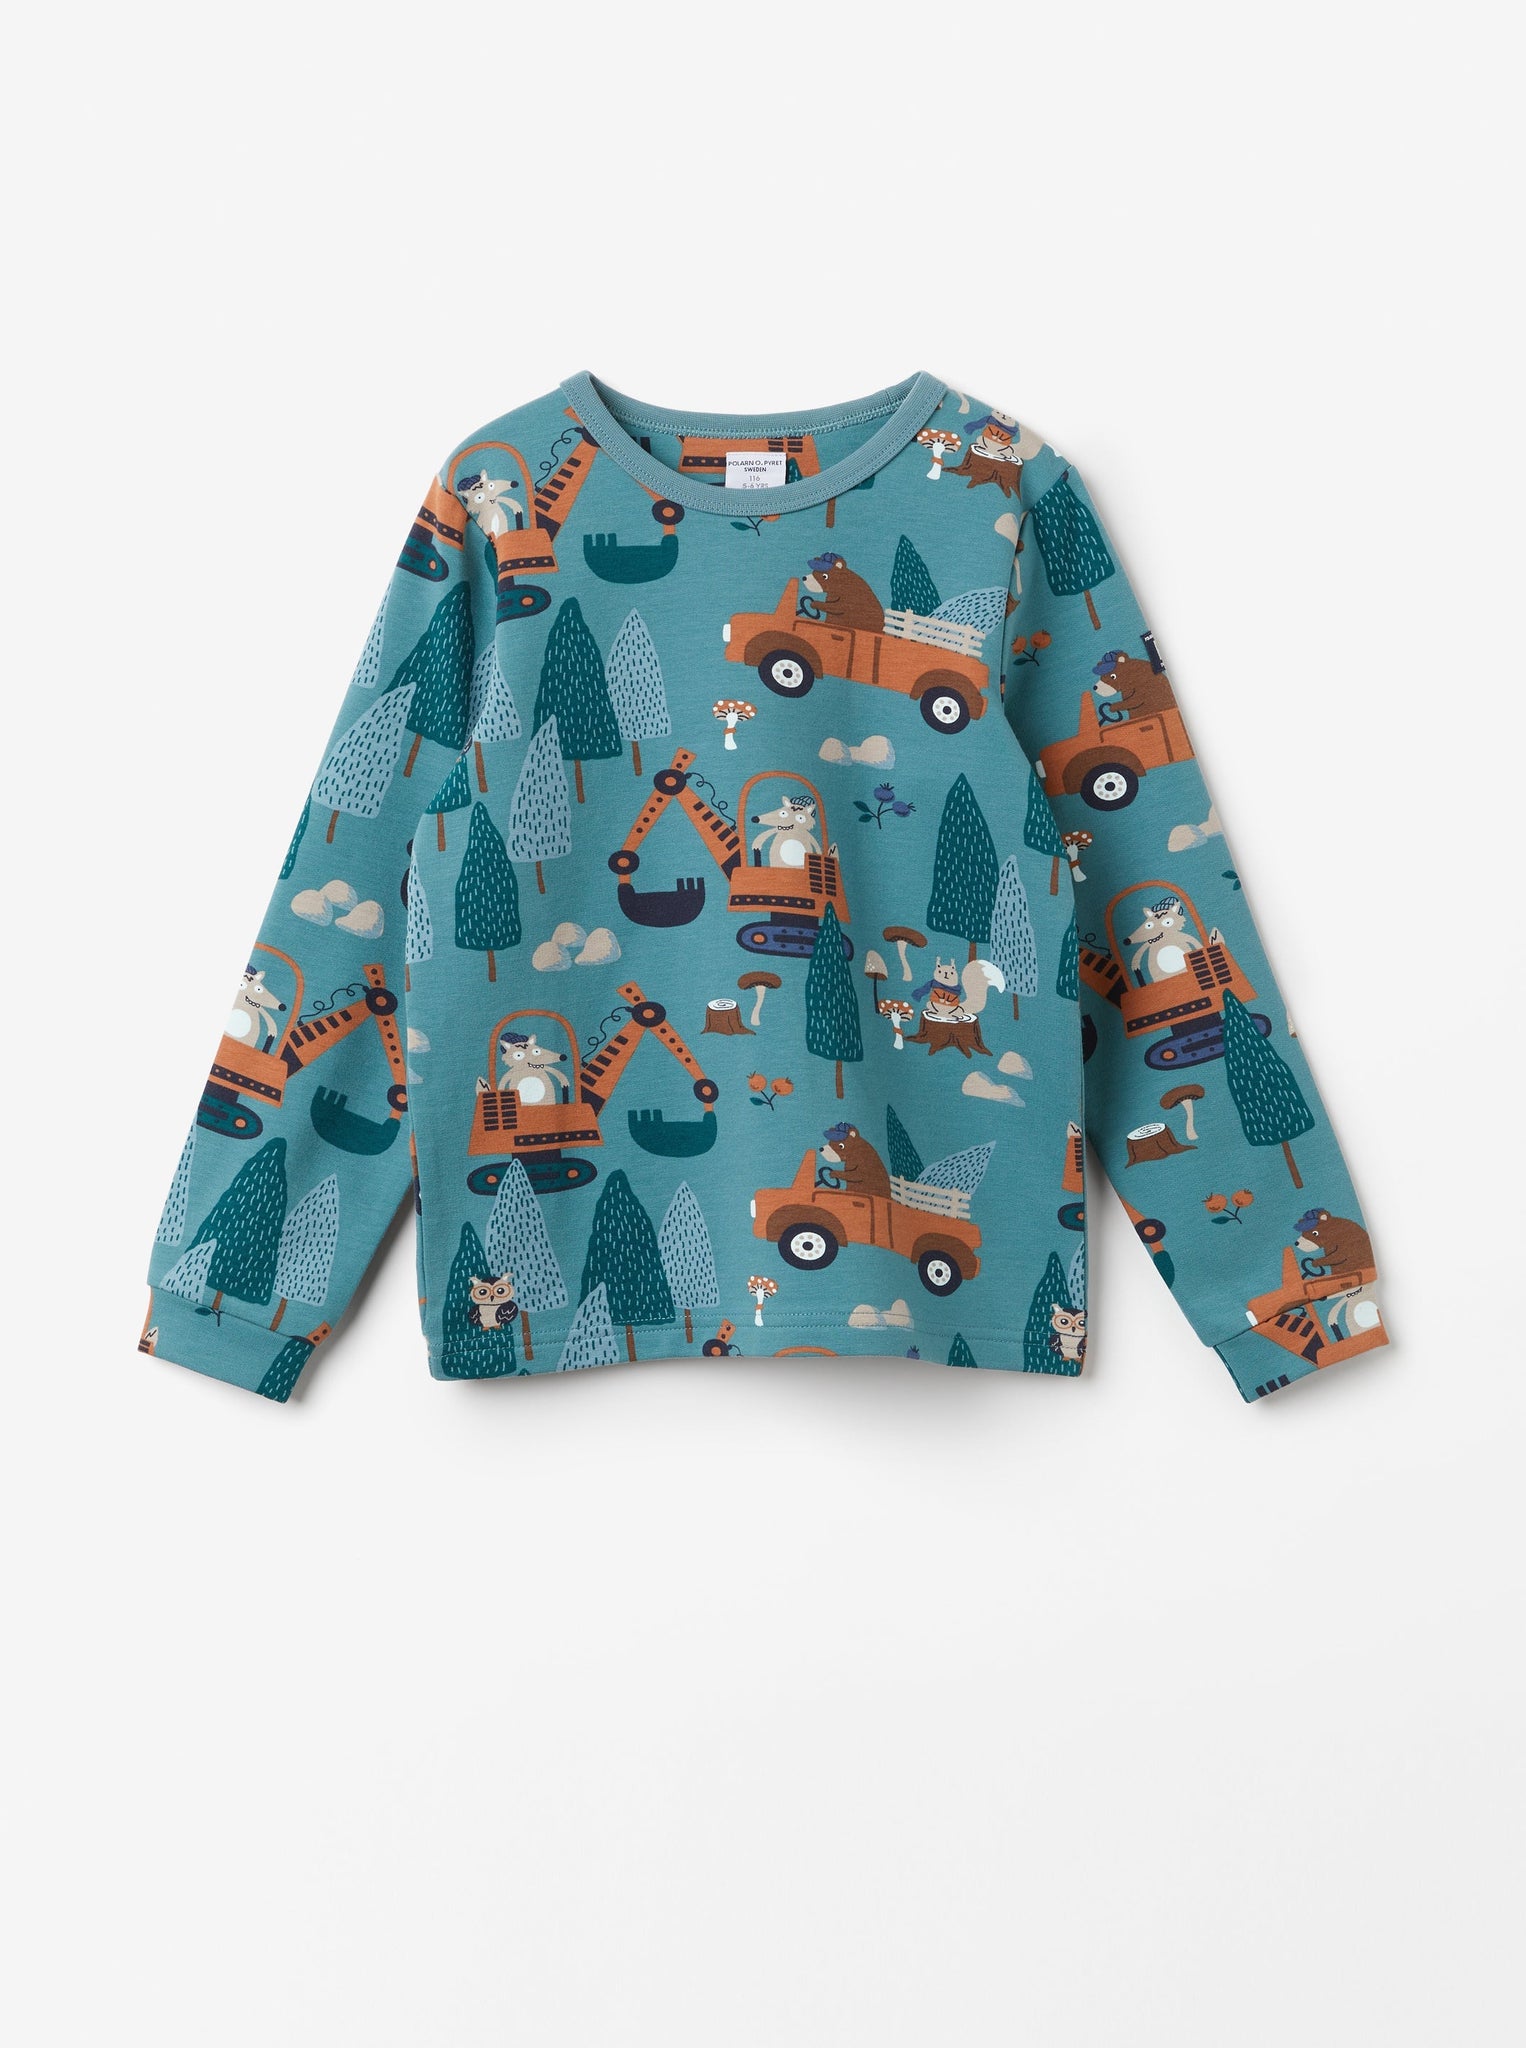 Organic Cotton Nordic Blue Kids Top from the Polarn O. Pyret kidswear collection. Nordic kids clothes made from sustainable sources.